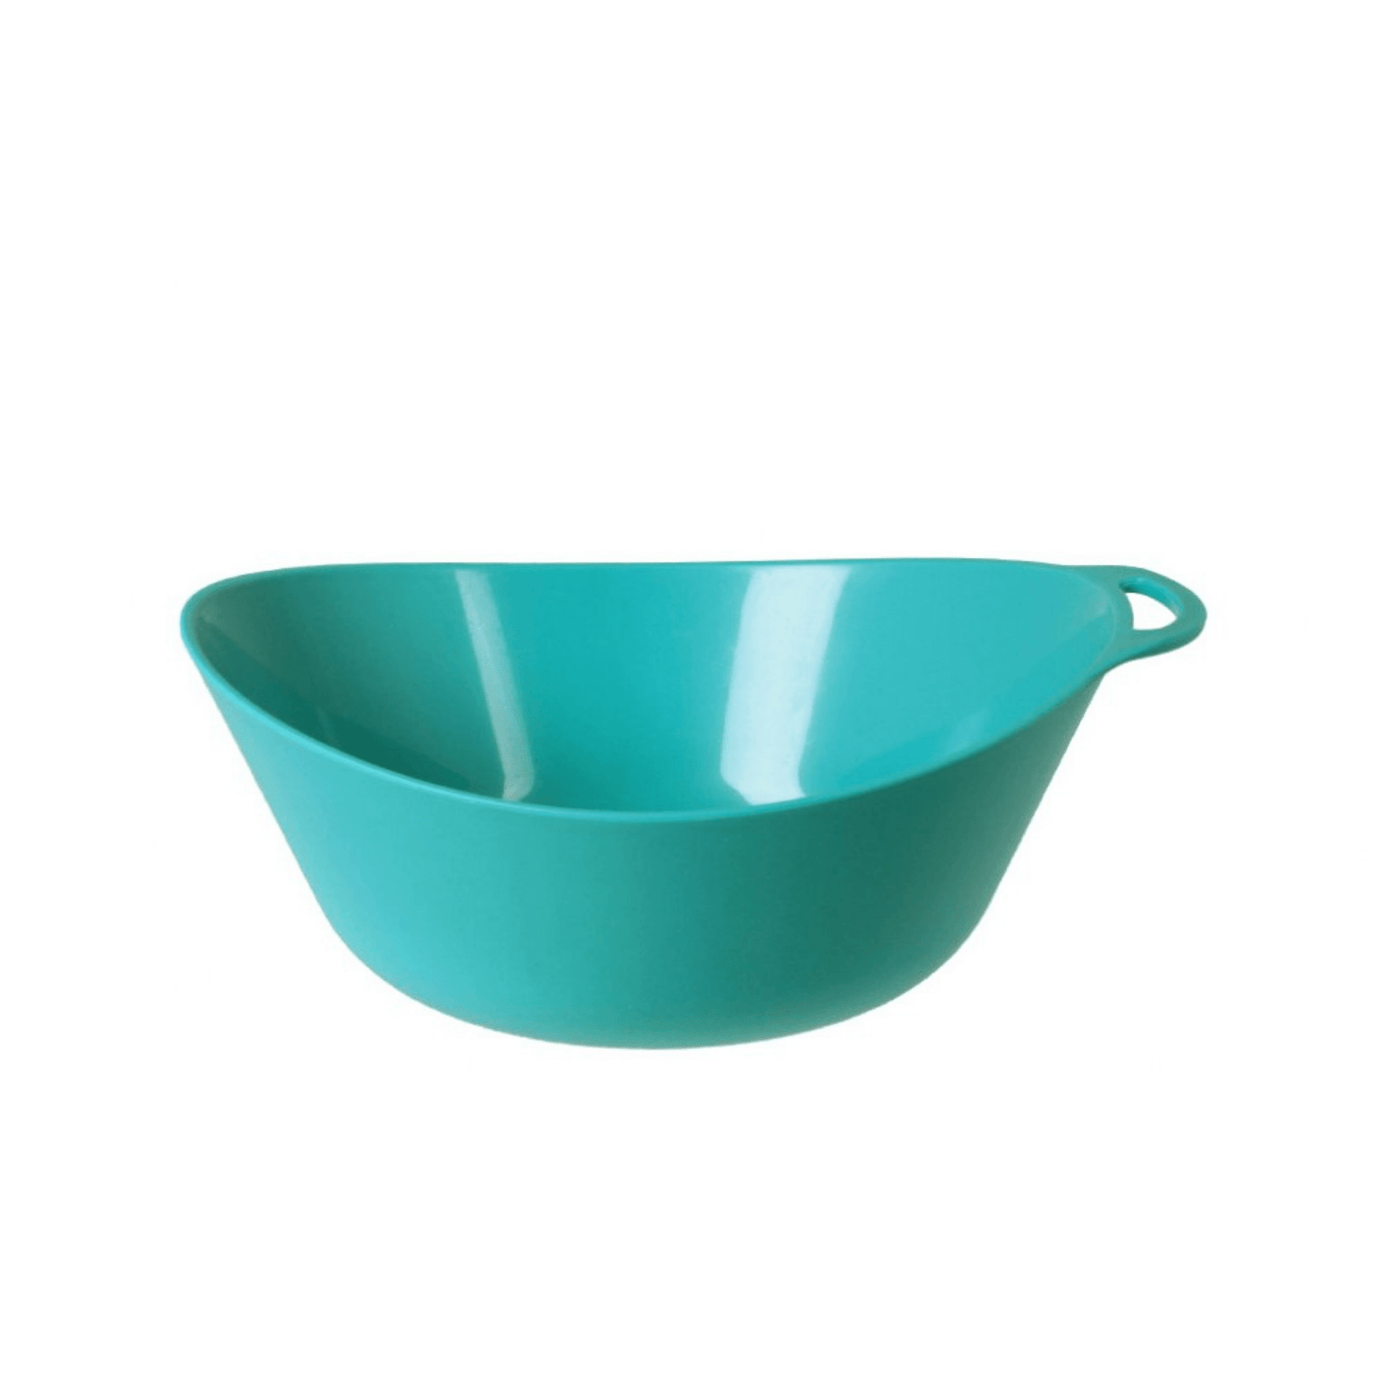 Lifeventure Ellipse Bowl | Outdoor and Camping Cookware | Further Faster Christchurch NZ #teal